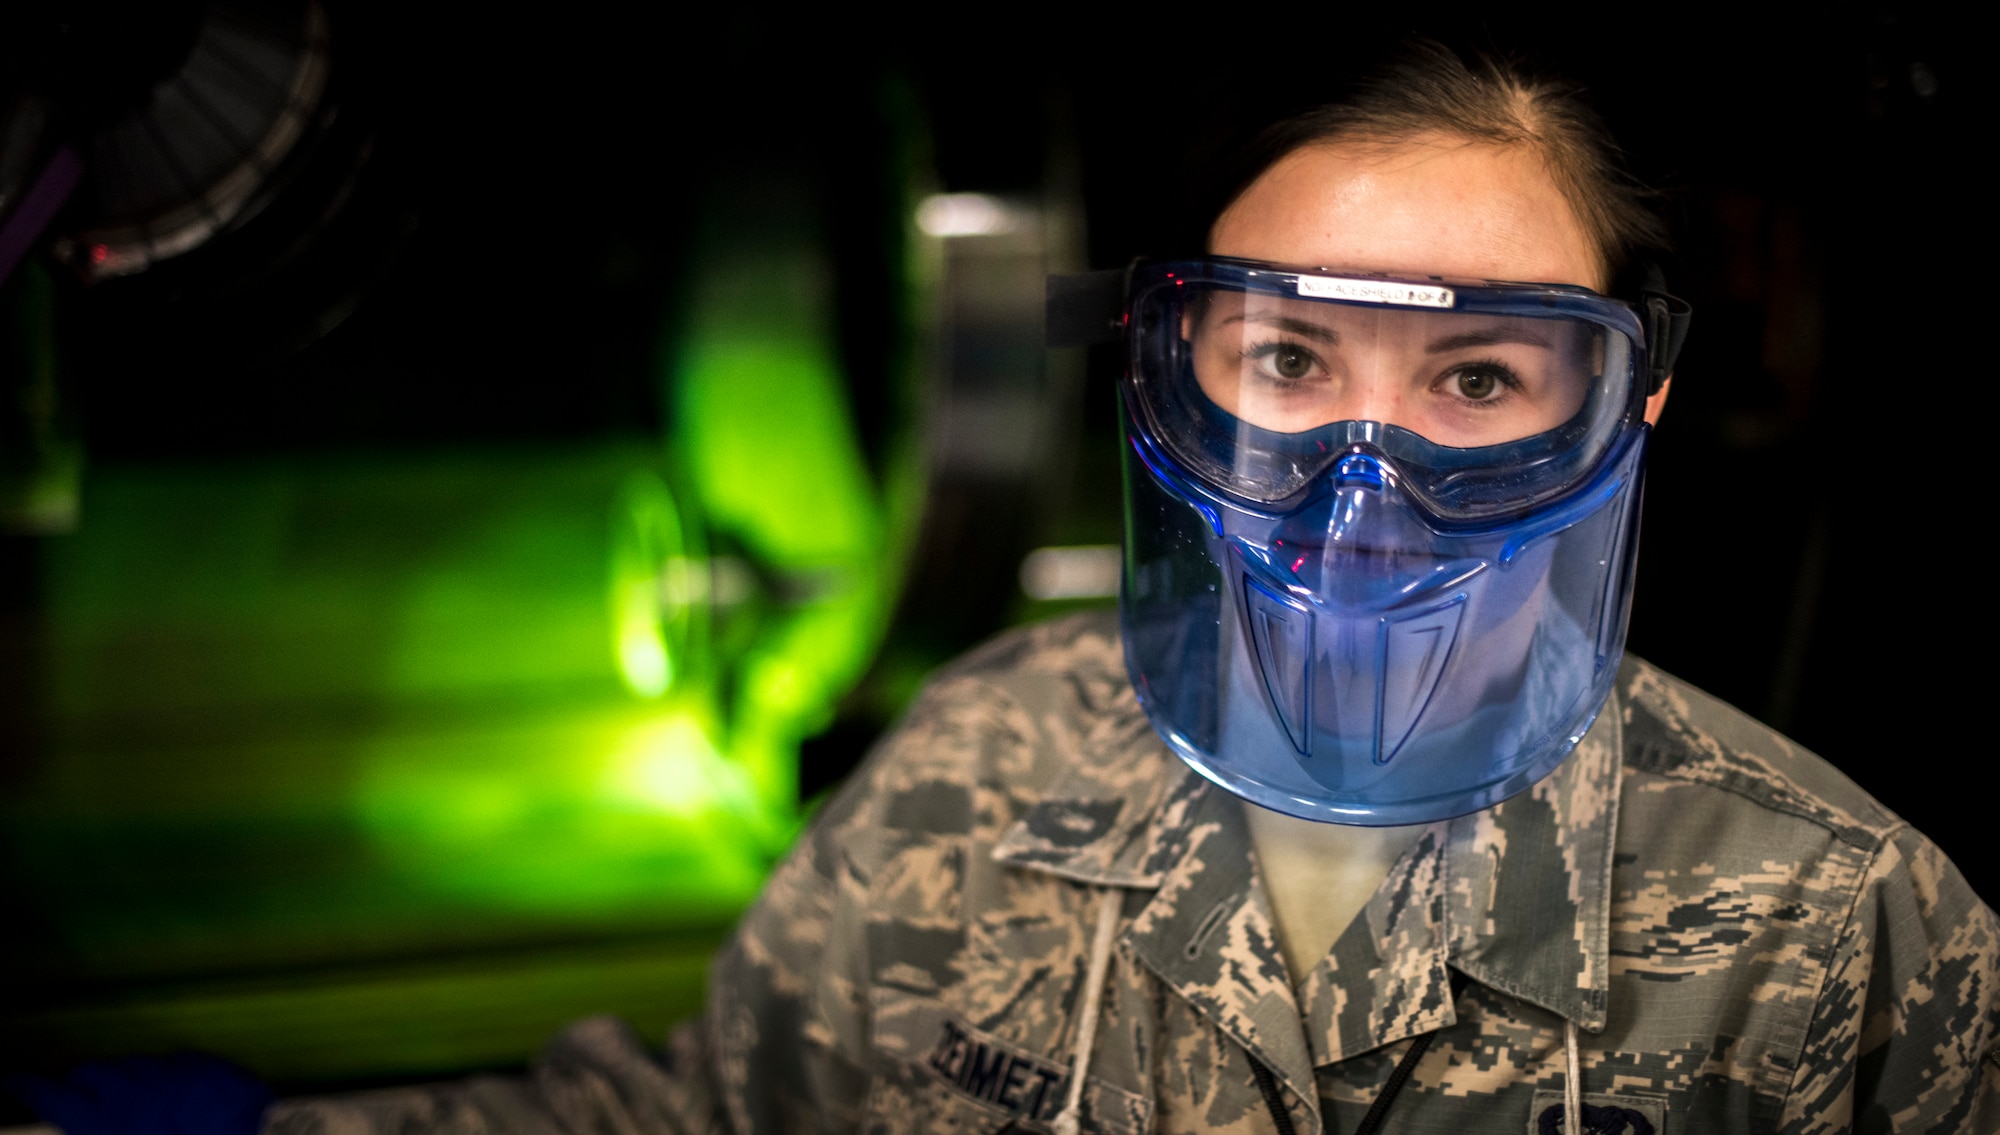 Senior Airman Violette Zeimet, 366th Equipment Maintenance Squadron non-destructive inspections journeyman, poses for a photo in front of one of the machines, Jan. 15, 2016, at Mountain Home Air Force Base, Idaho.  With different types of materials coming into the shop, NDI personnel must determine what test method to use and prepare fluids and parts for inspection.(U.S. Air Force photo by Senior Airman Jeremy L. Mosier/Released)